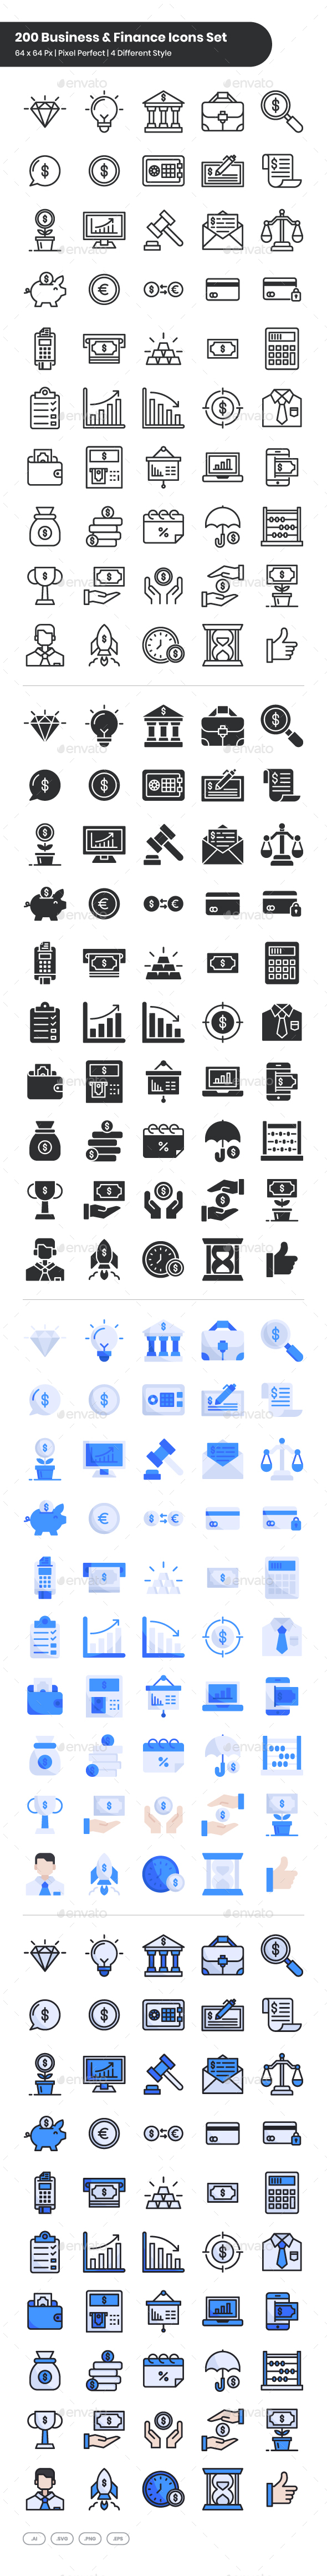 [DOWNLOAD]200 Business & Finance Icons Set